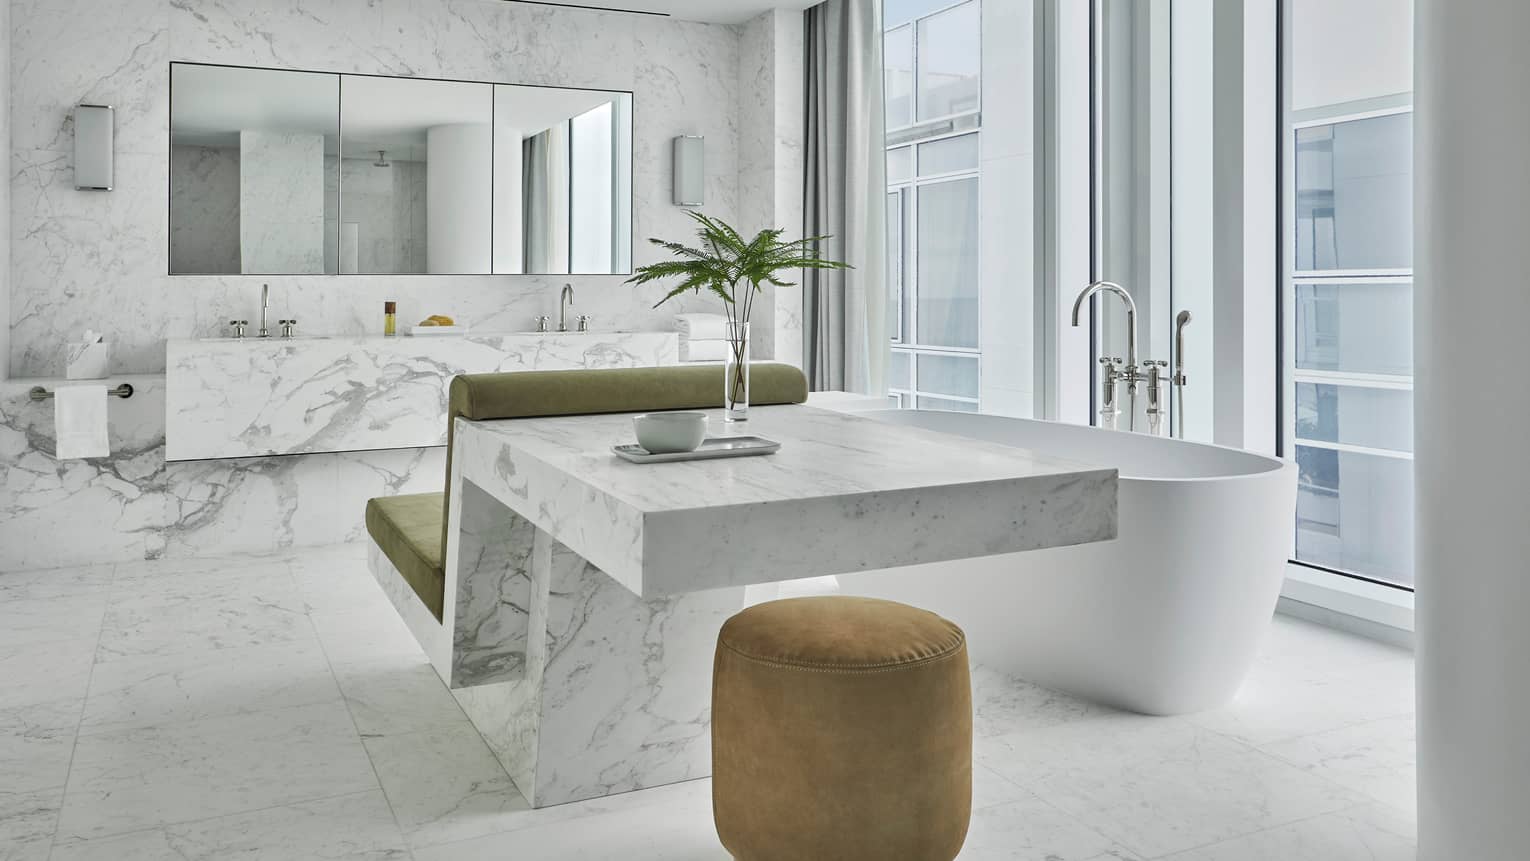 Large, modern white marble bathroom with vanity and sink, plush chair against counter, velvet bench